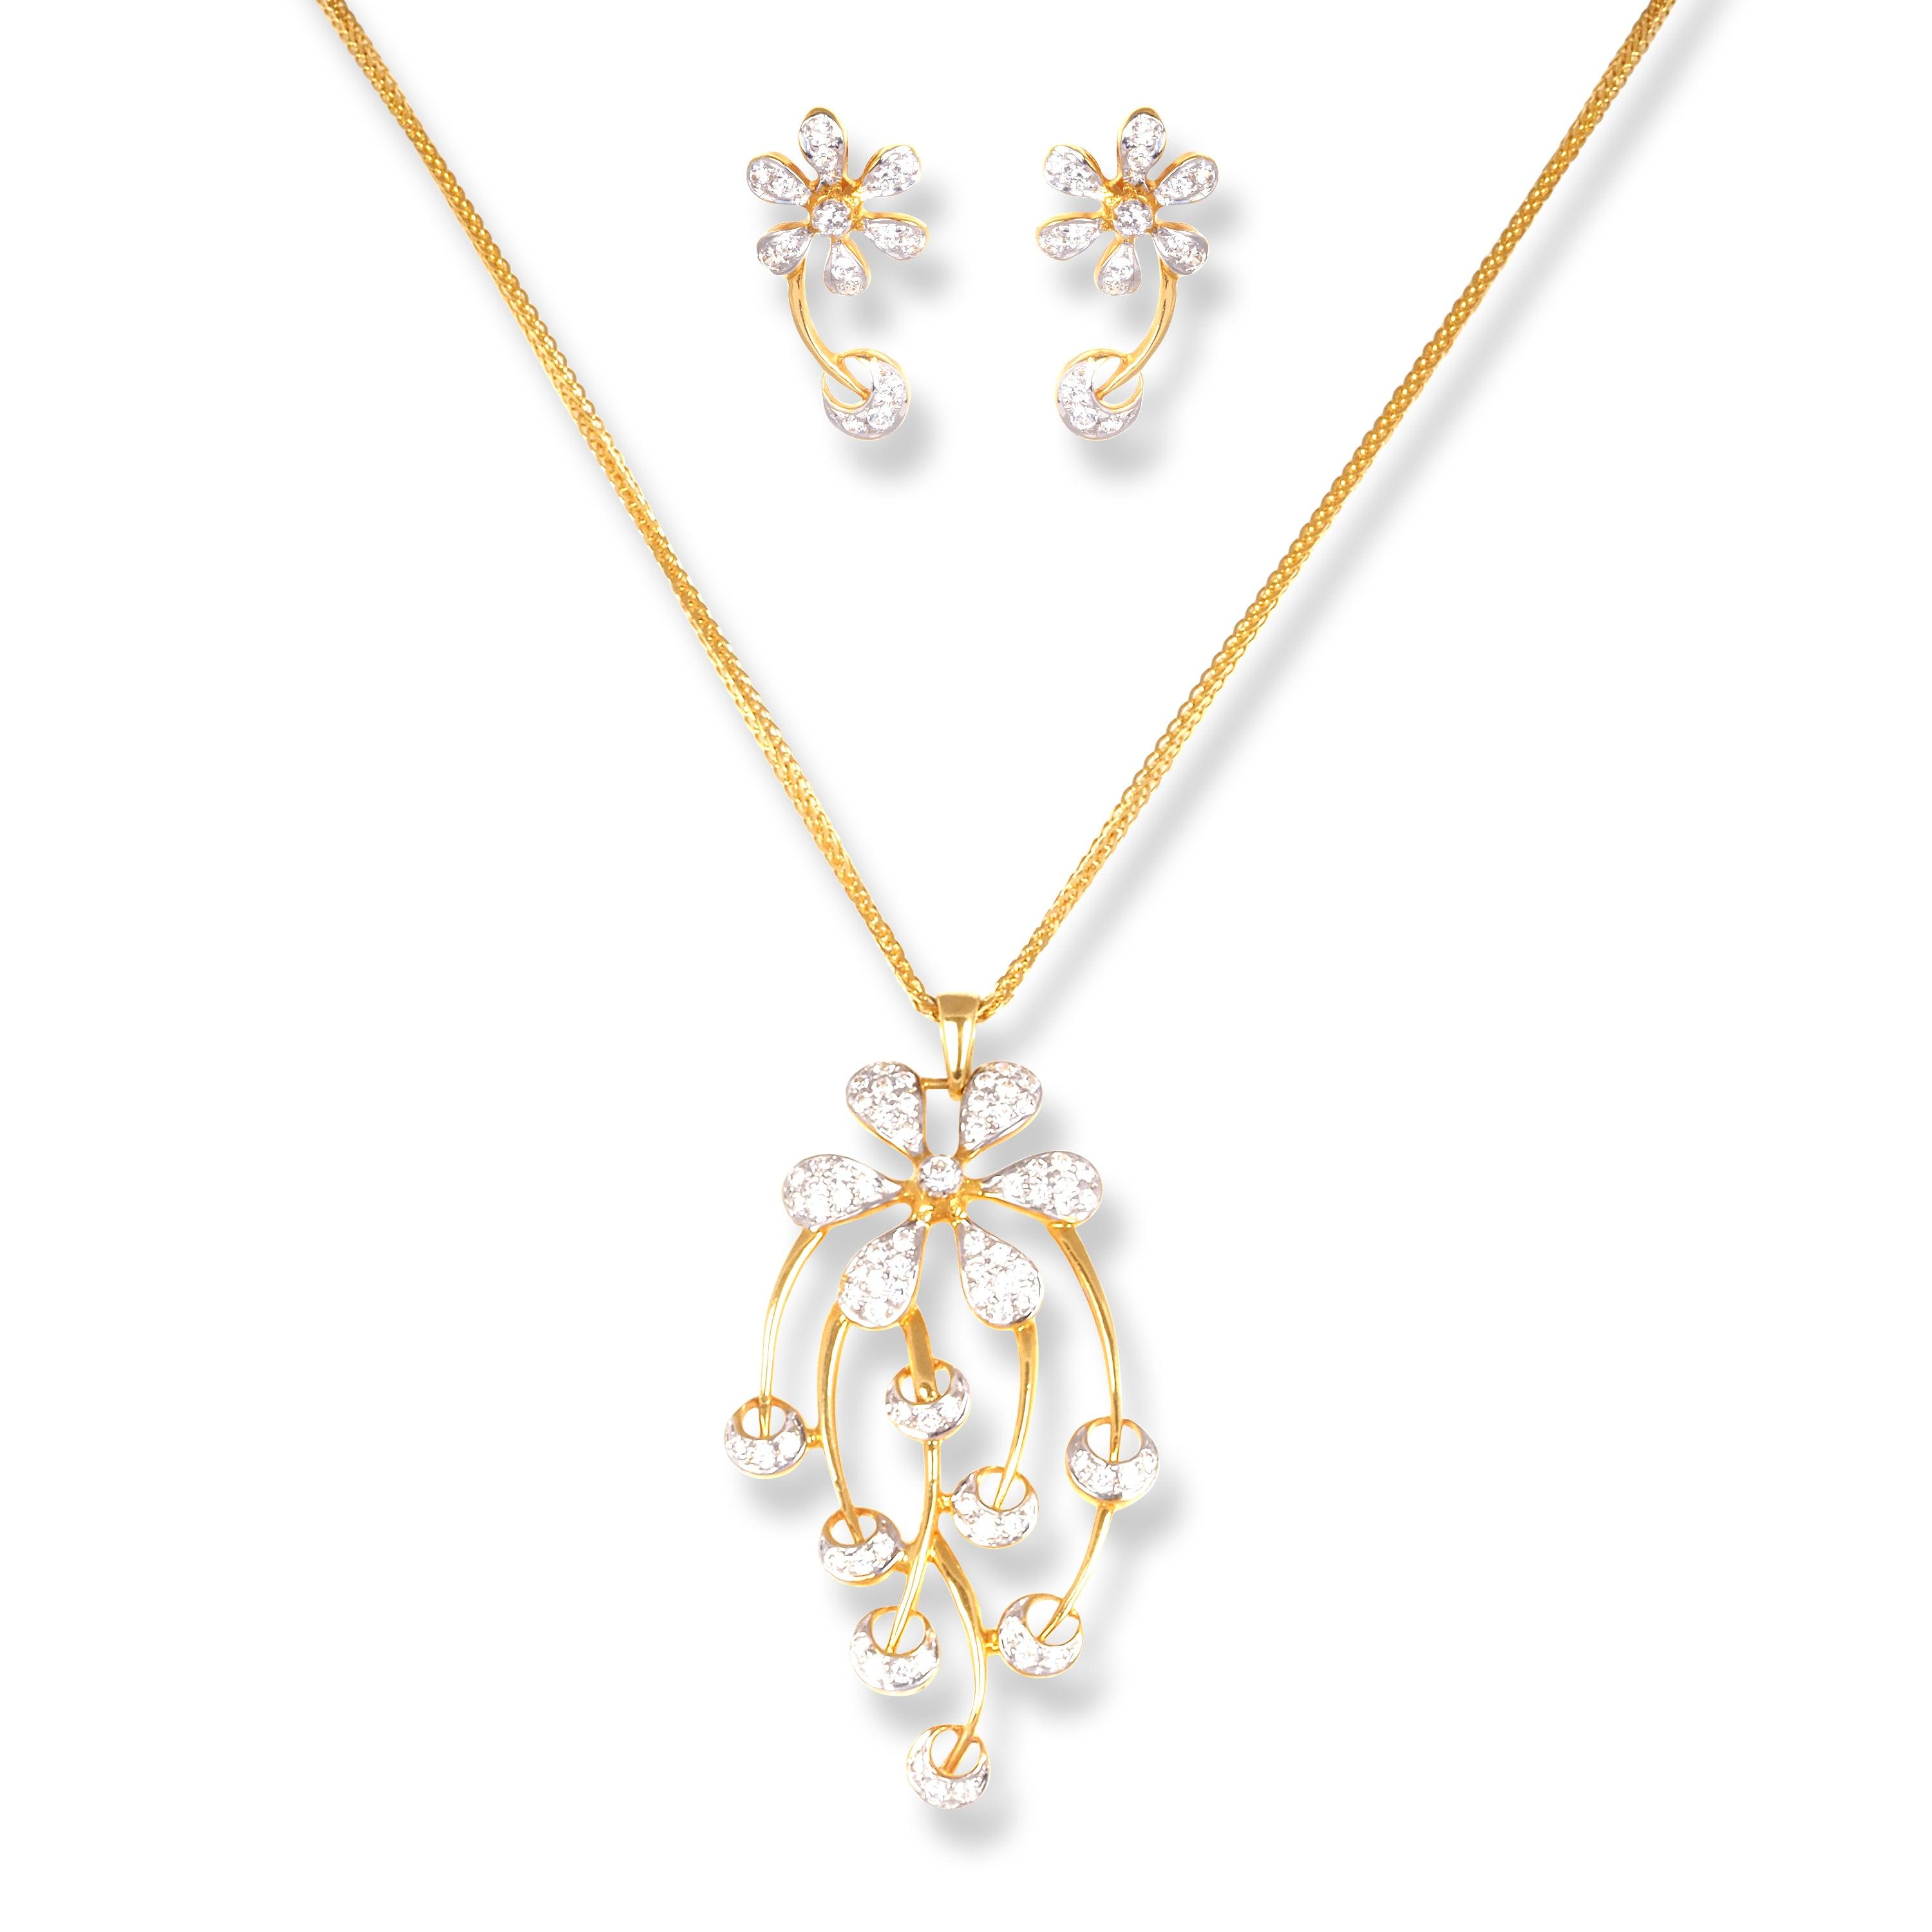 18ct Yellow Gold Floral Design Set with Cubic Zirconia Stones P-4407 - Minar Jewellers